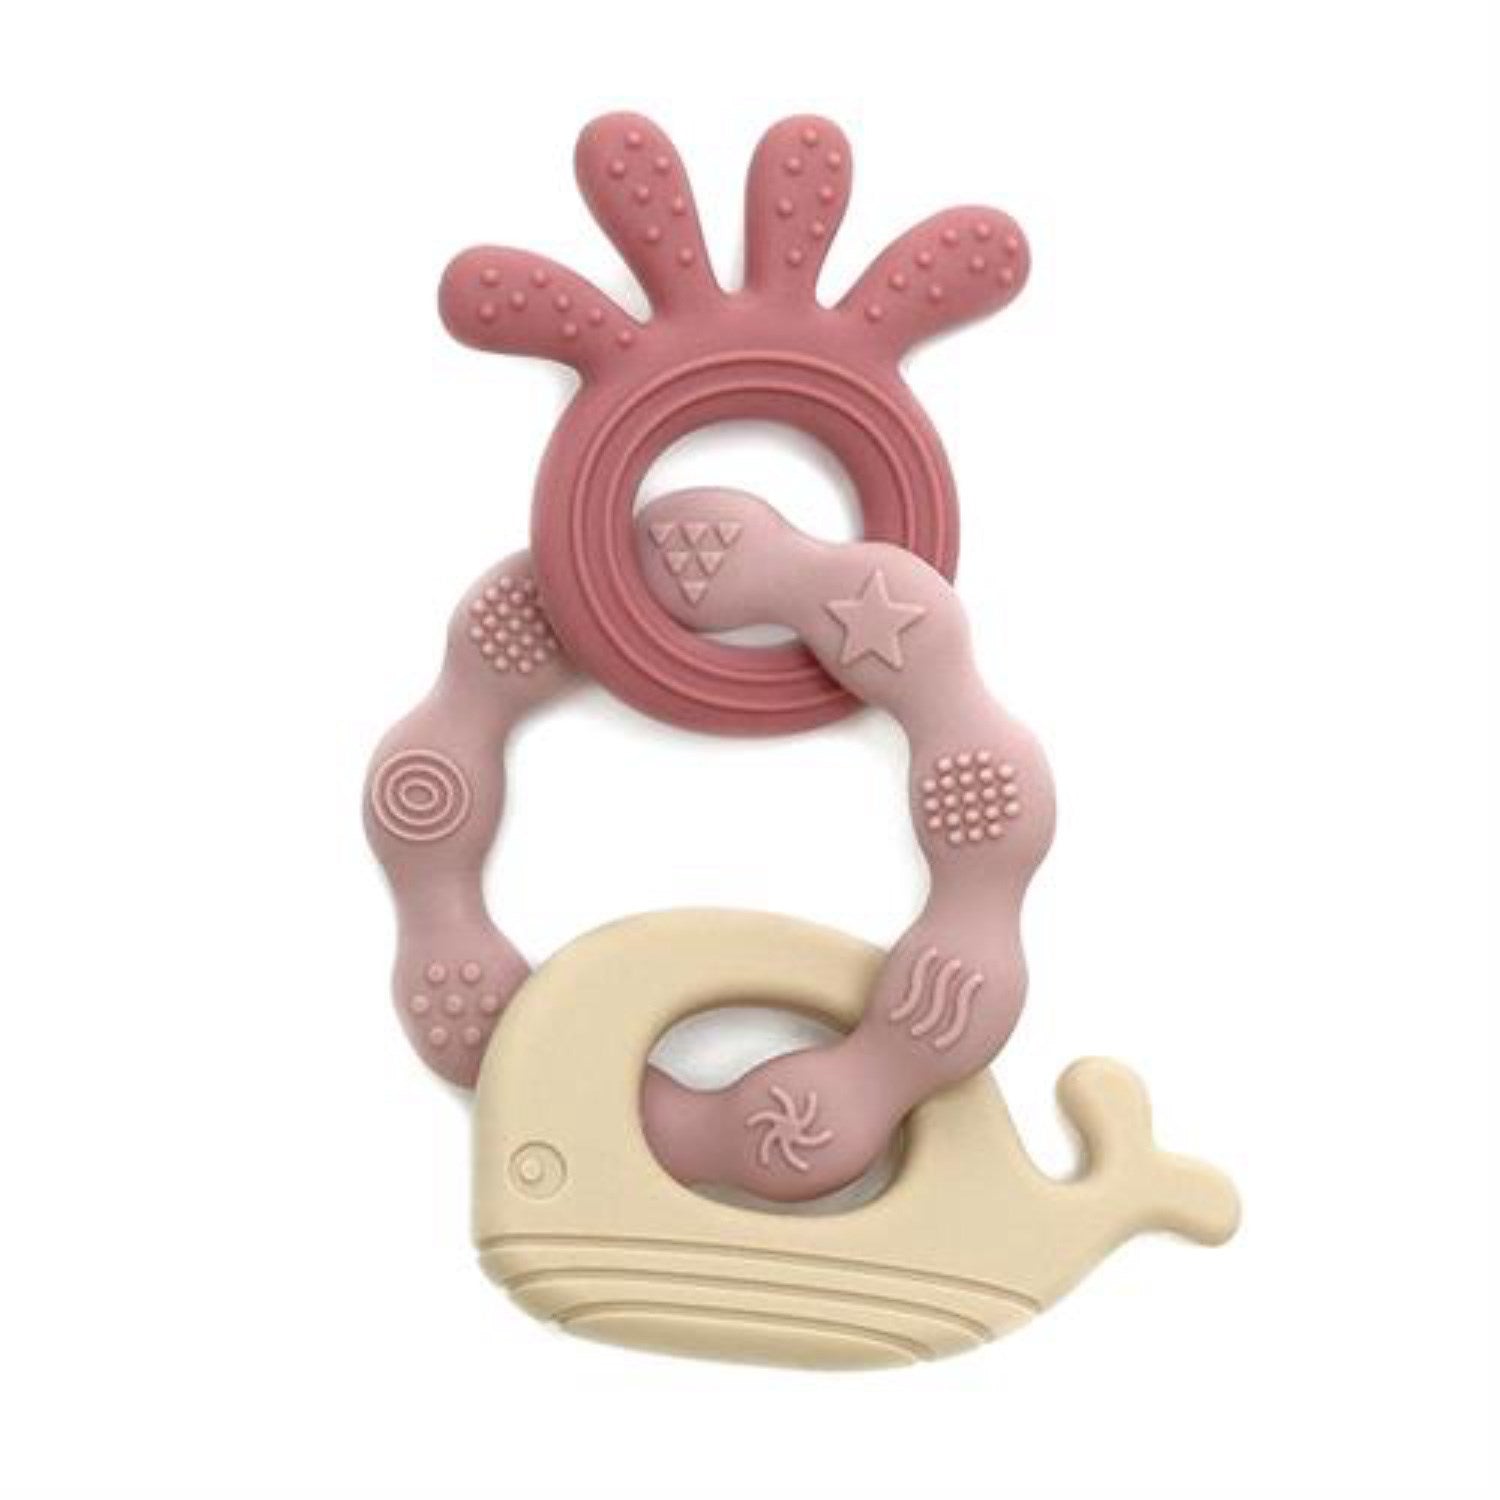 Magni Pink Teether - Octopus/Whale